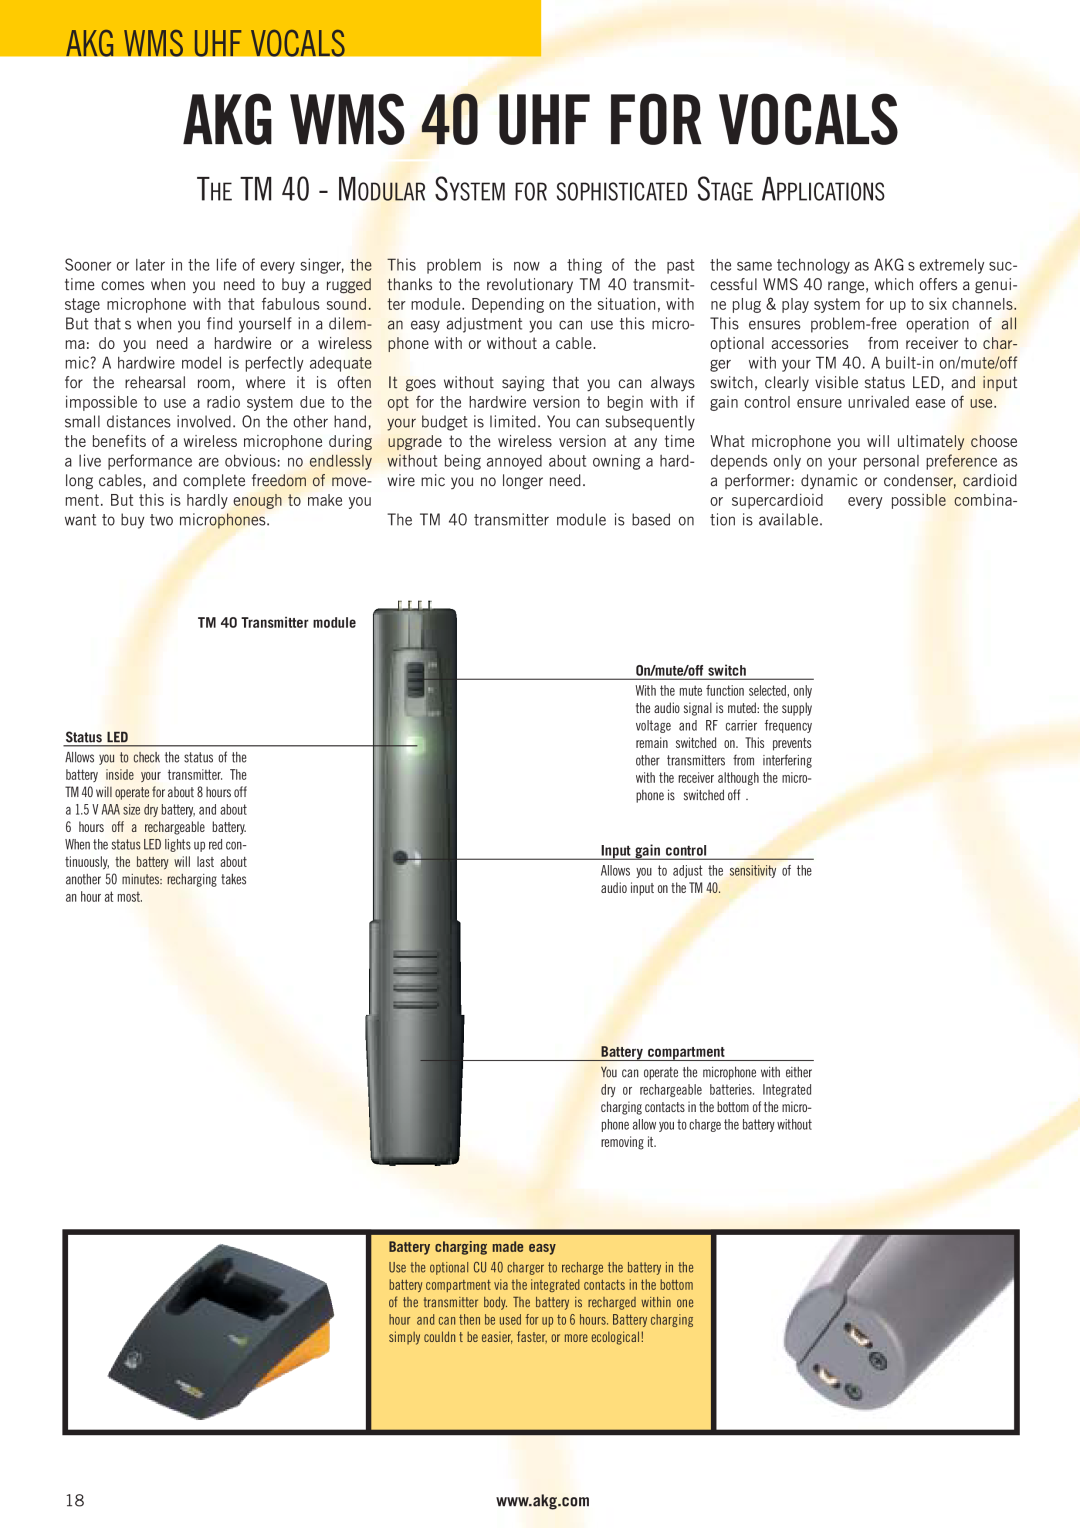 AKG Acoustics WMS 4000 manual THE TM 40 - MODULAR SYSTEM FOR SOPHISTICATED STAGE APPLICATIONS, AKG WMS 40 UHF FOR VOCALS 